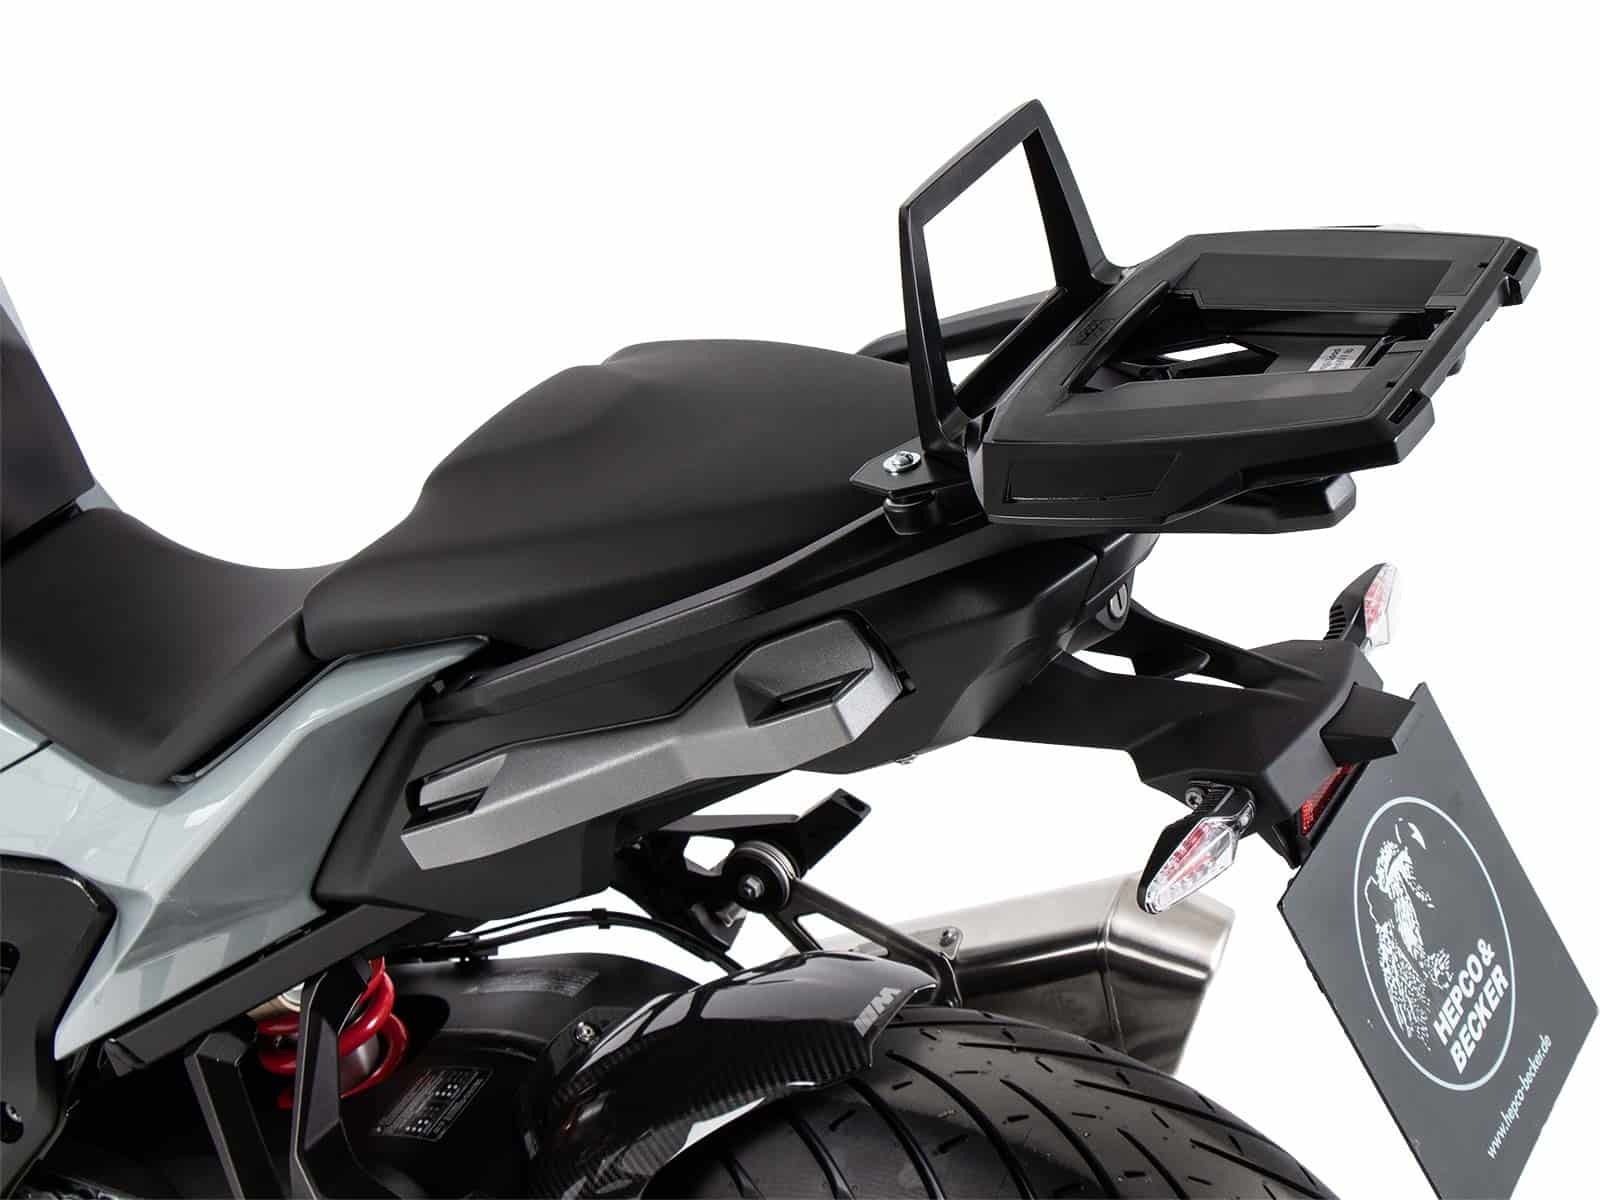 Alurack top case carrier black for combination with original rear rack for BMW S 1000 XR (2020-2023)